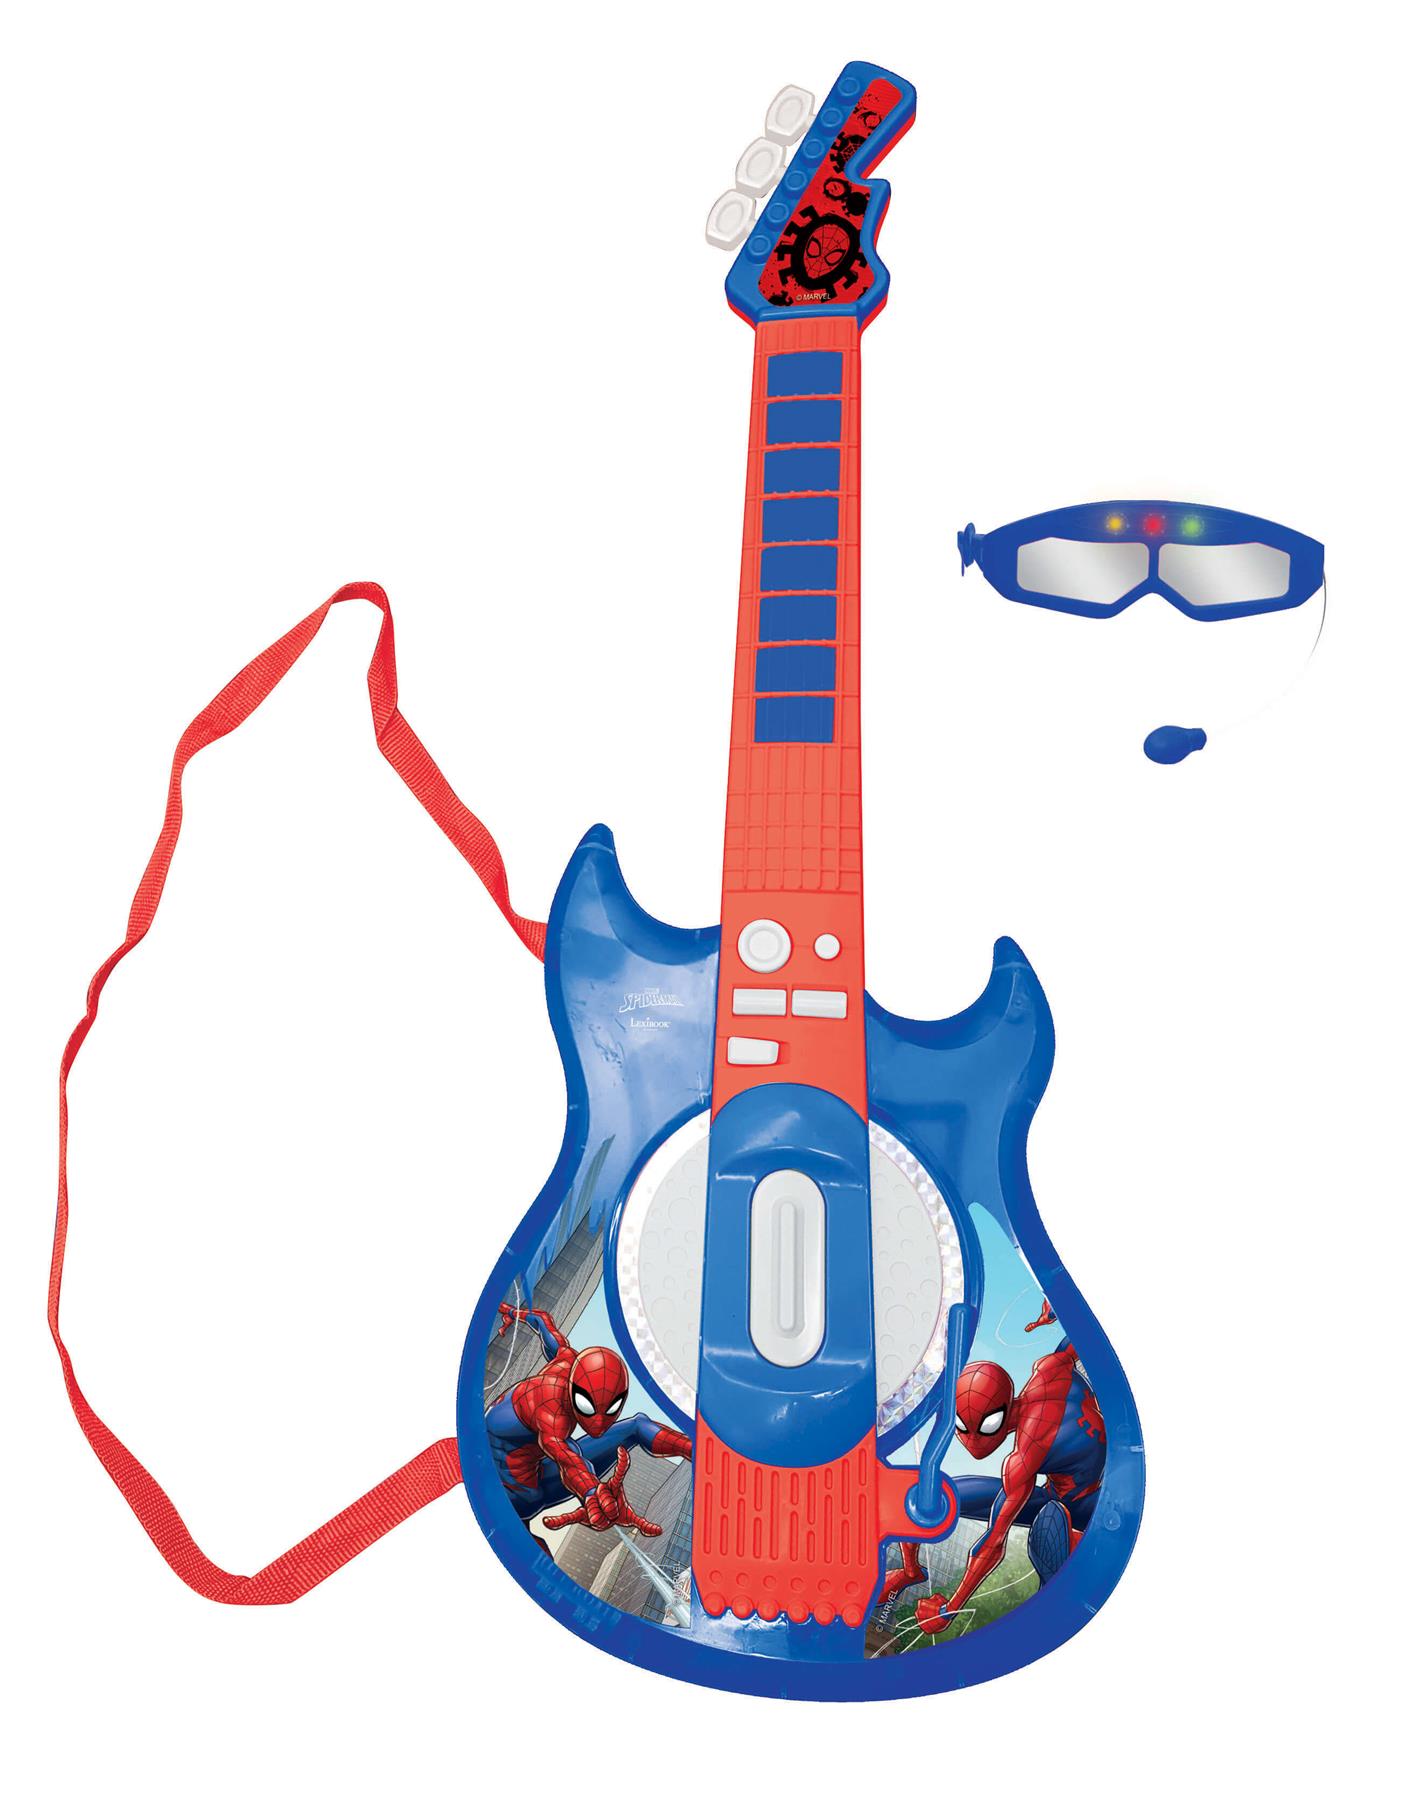 Rockstar Mini Electric Finger Guitar Electronic Musical Toy 